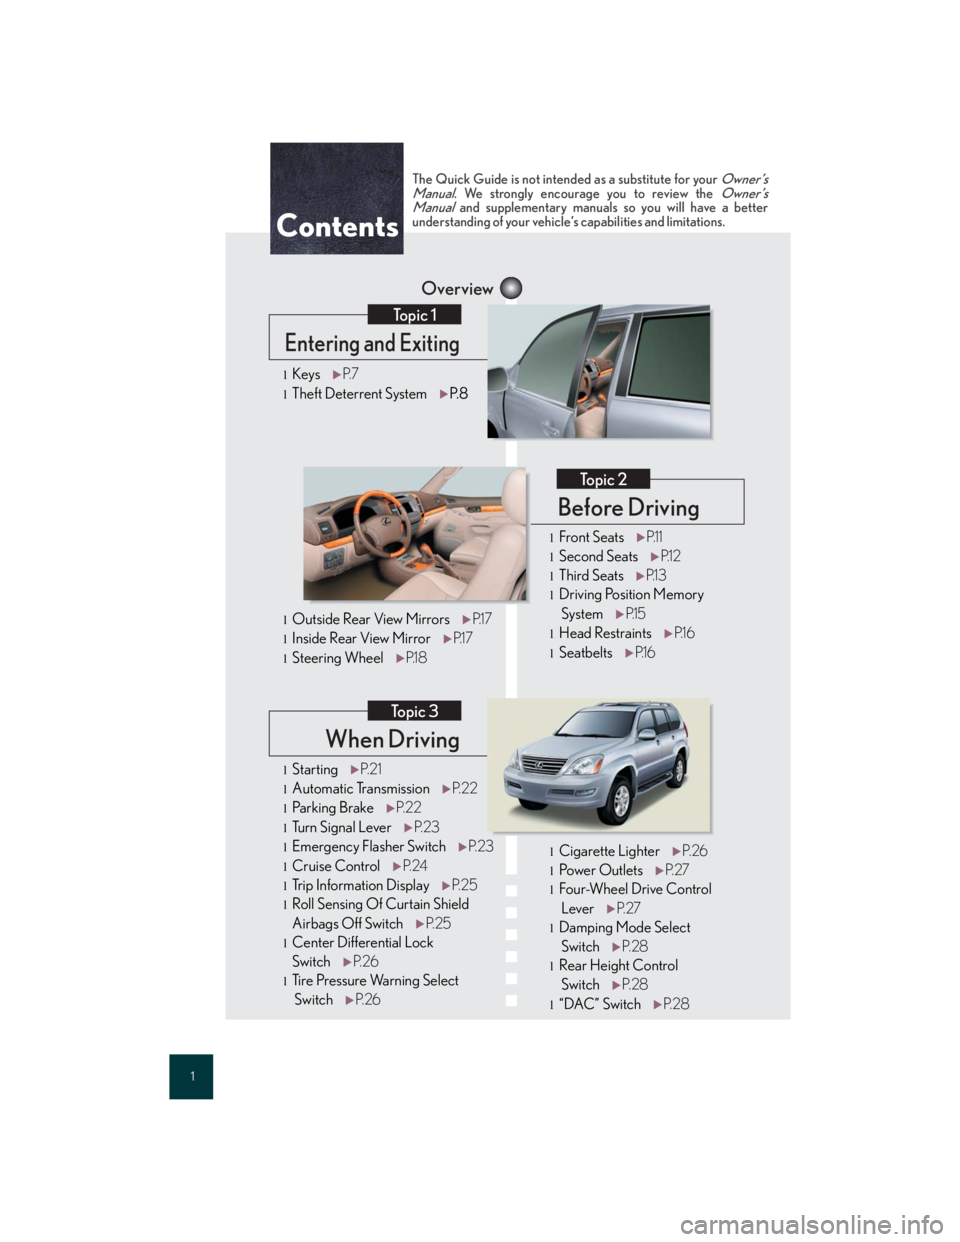 Lexus GX470 2007  Do-it-yourself maintenance / 1
When Driving
Topic 3
Overview
Contents
Entering and Exiting
Topic 1
Before Driving
Topic 2
lStartingP. 2 1
lAutomatic TransmissionP. 2 2
lParking BrakeP. 2 2
lTu r n  S i g n a l  L e v e rP. 2 3
lE